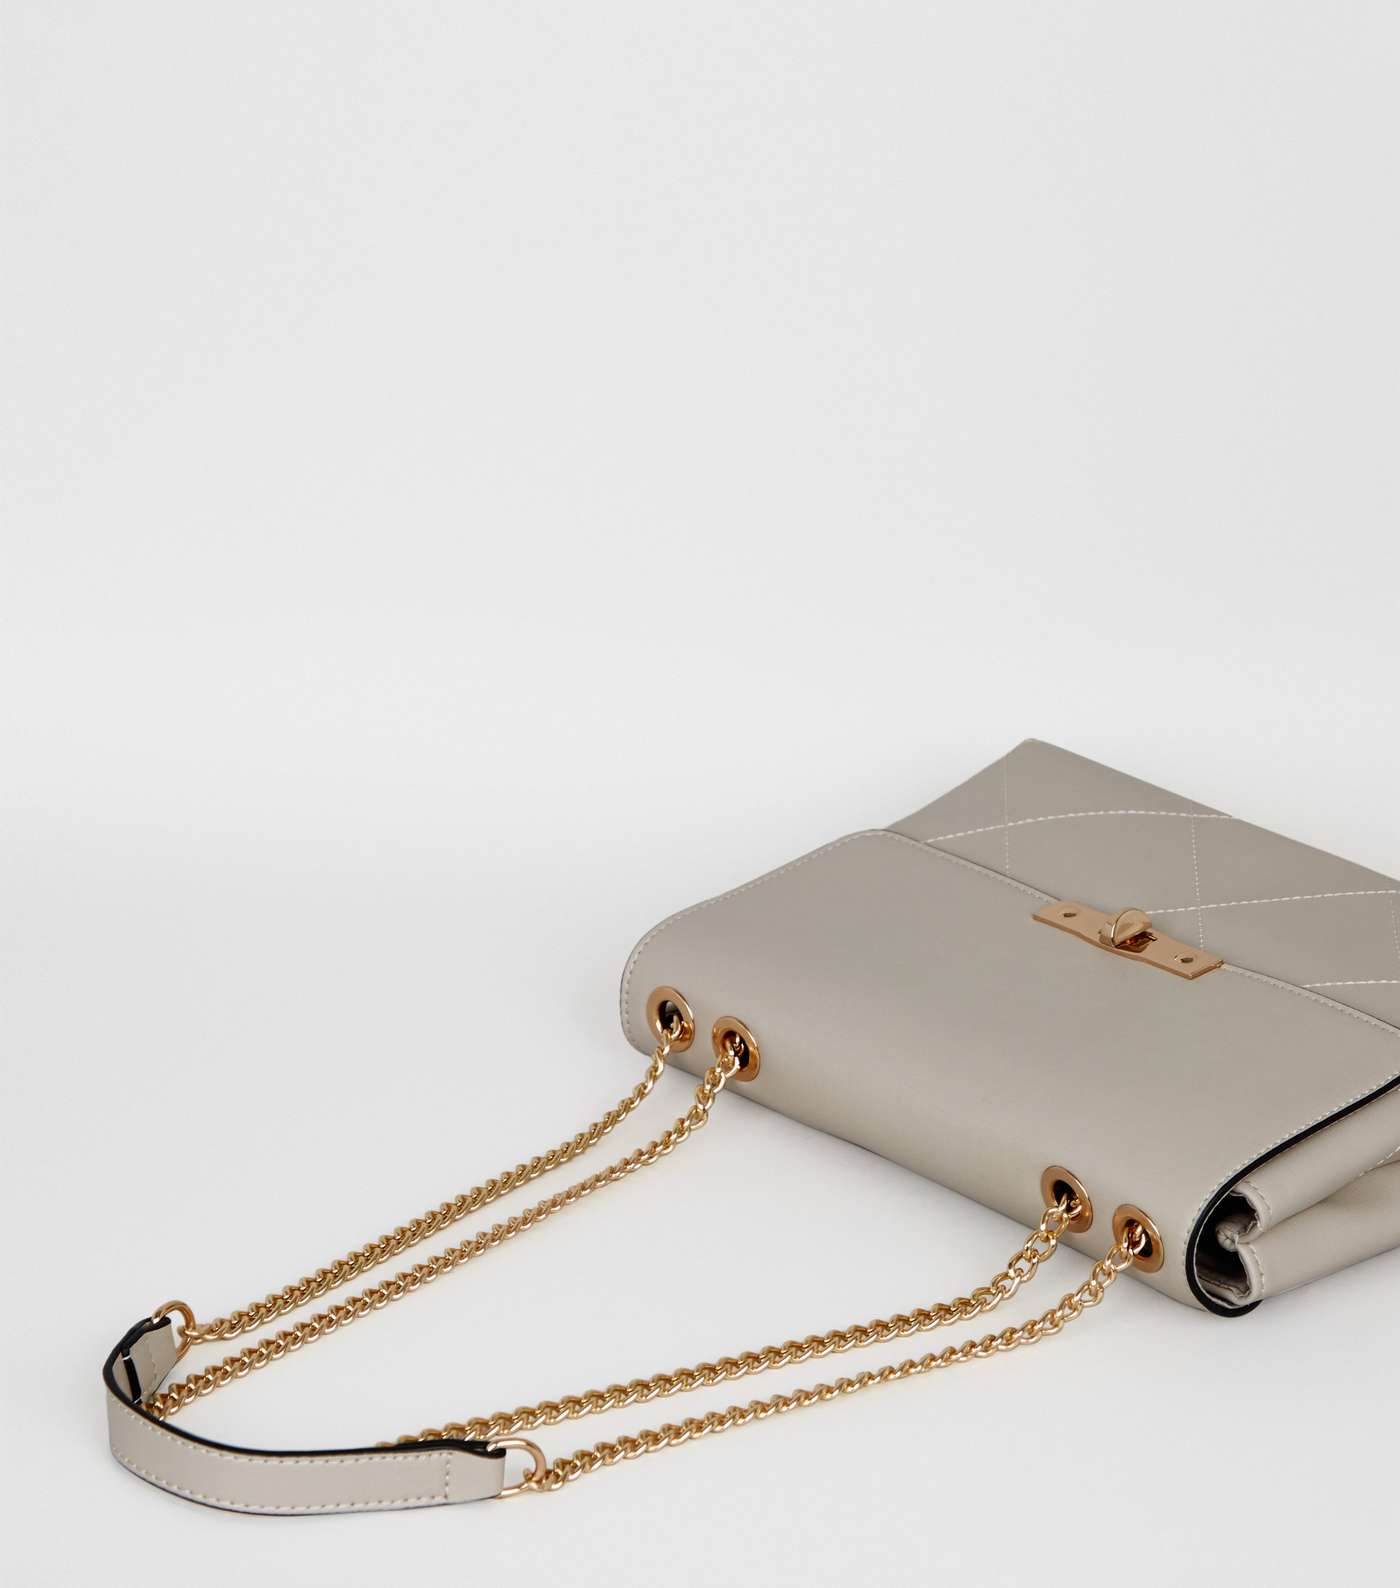 Grey Leather-Look Quilted Chain Shoulder Bag Image 3